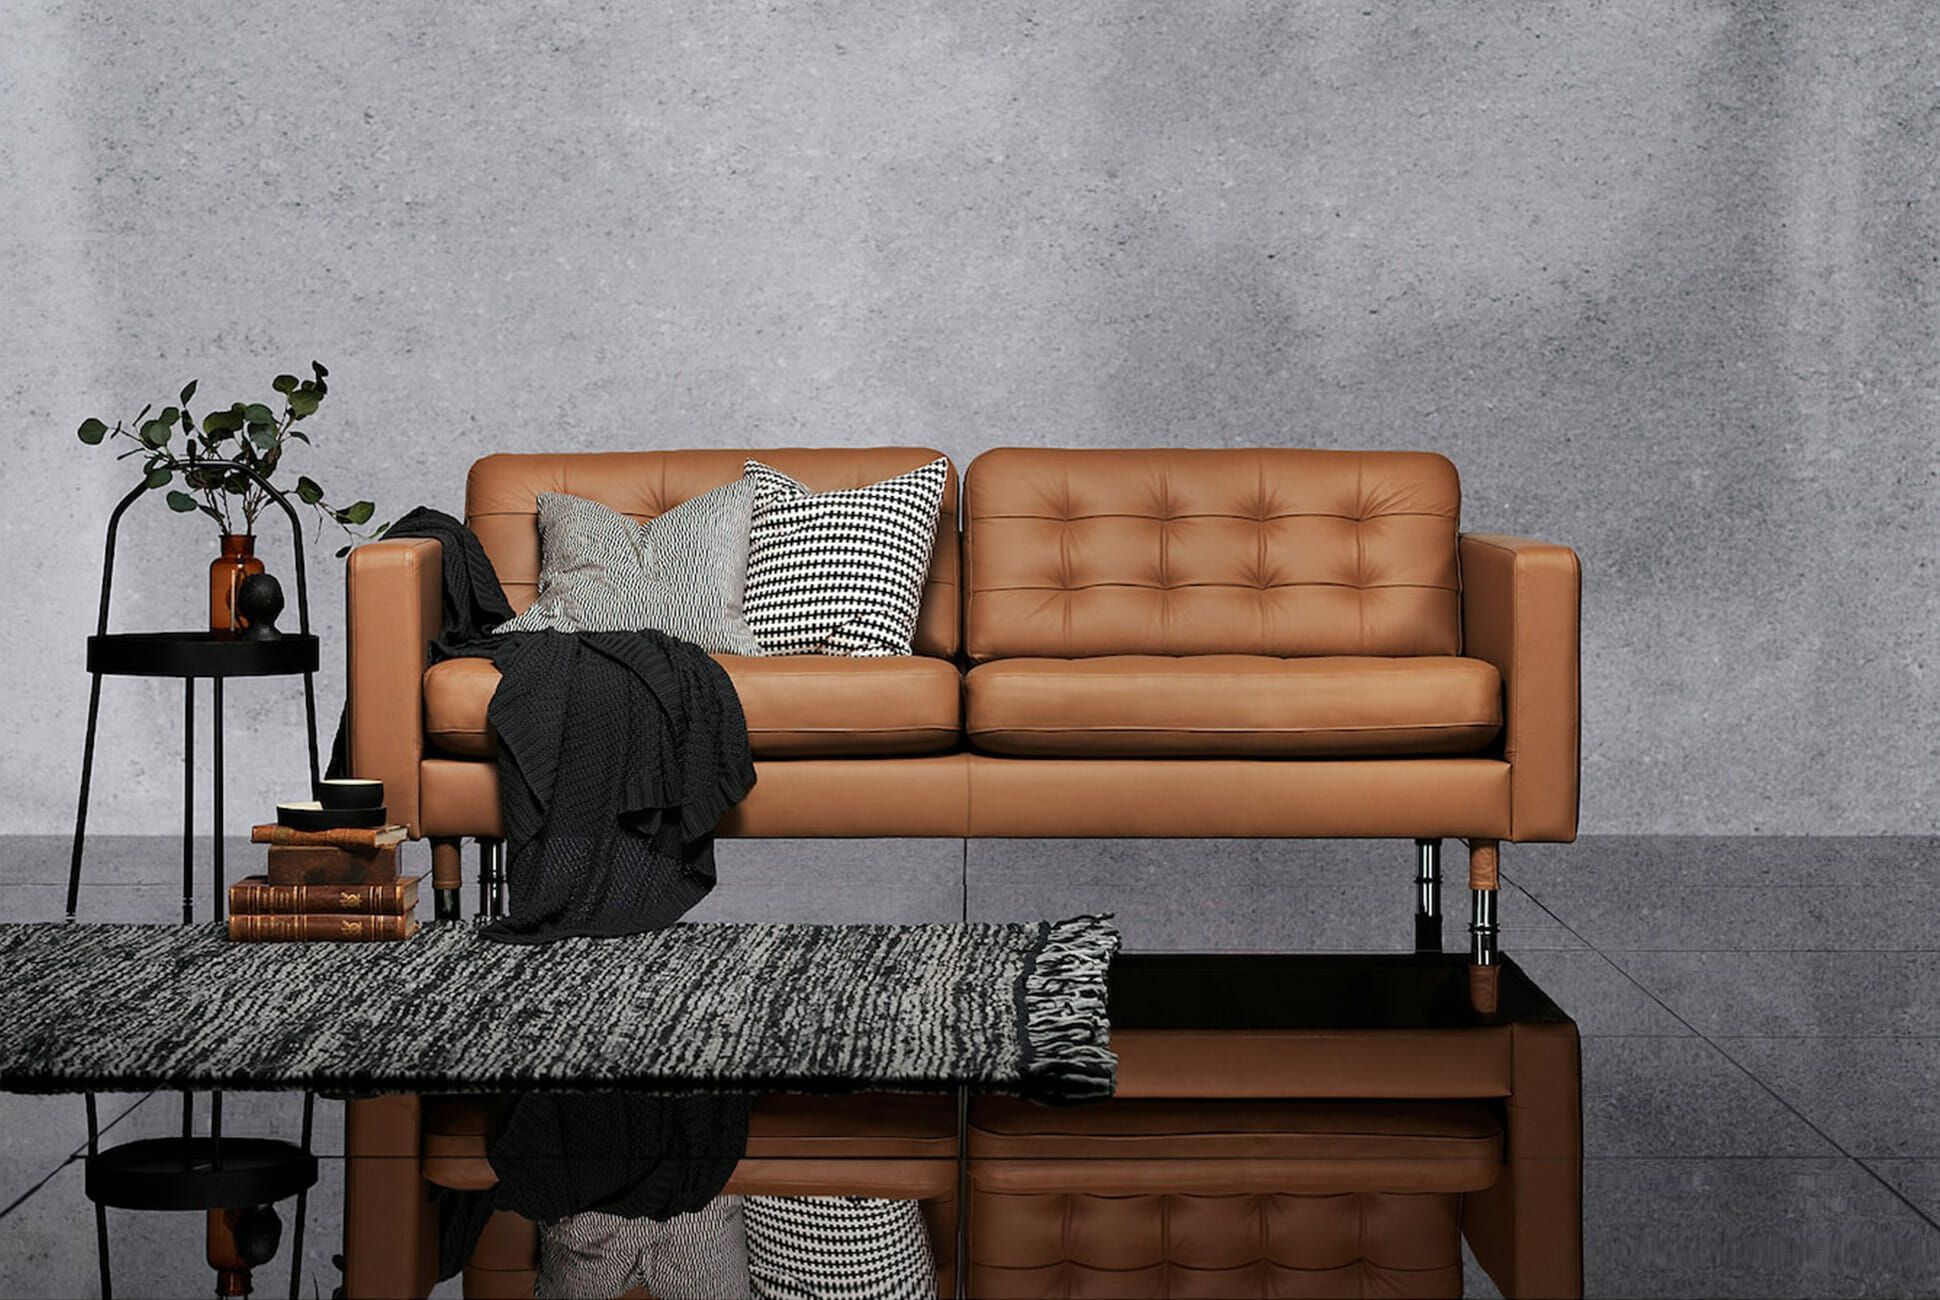 Comfortable and Aesthetic Leather Sofa